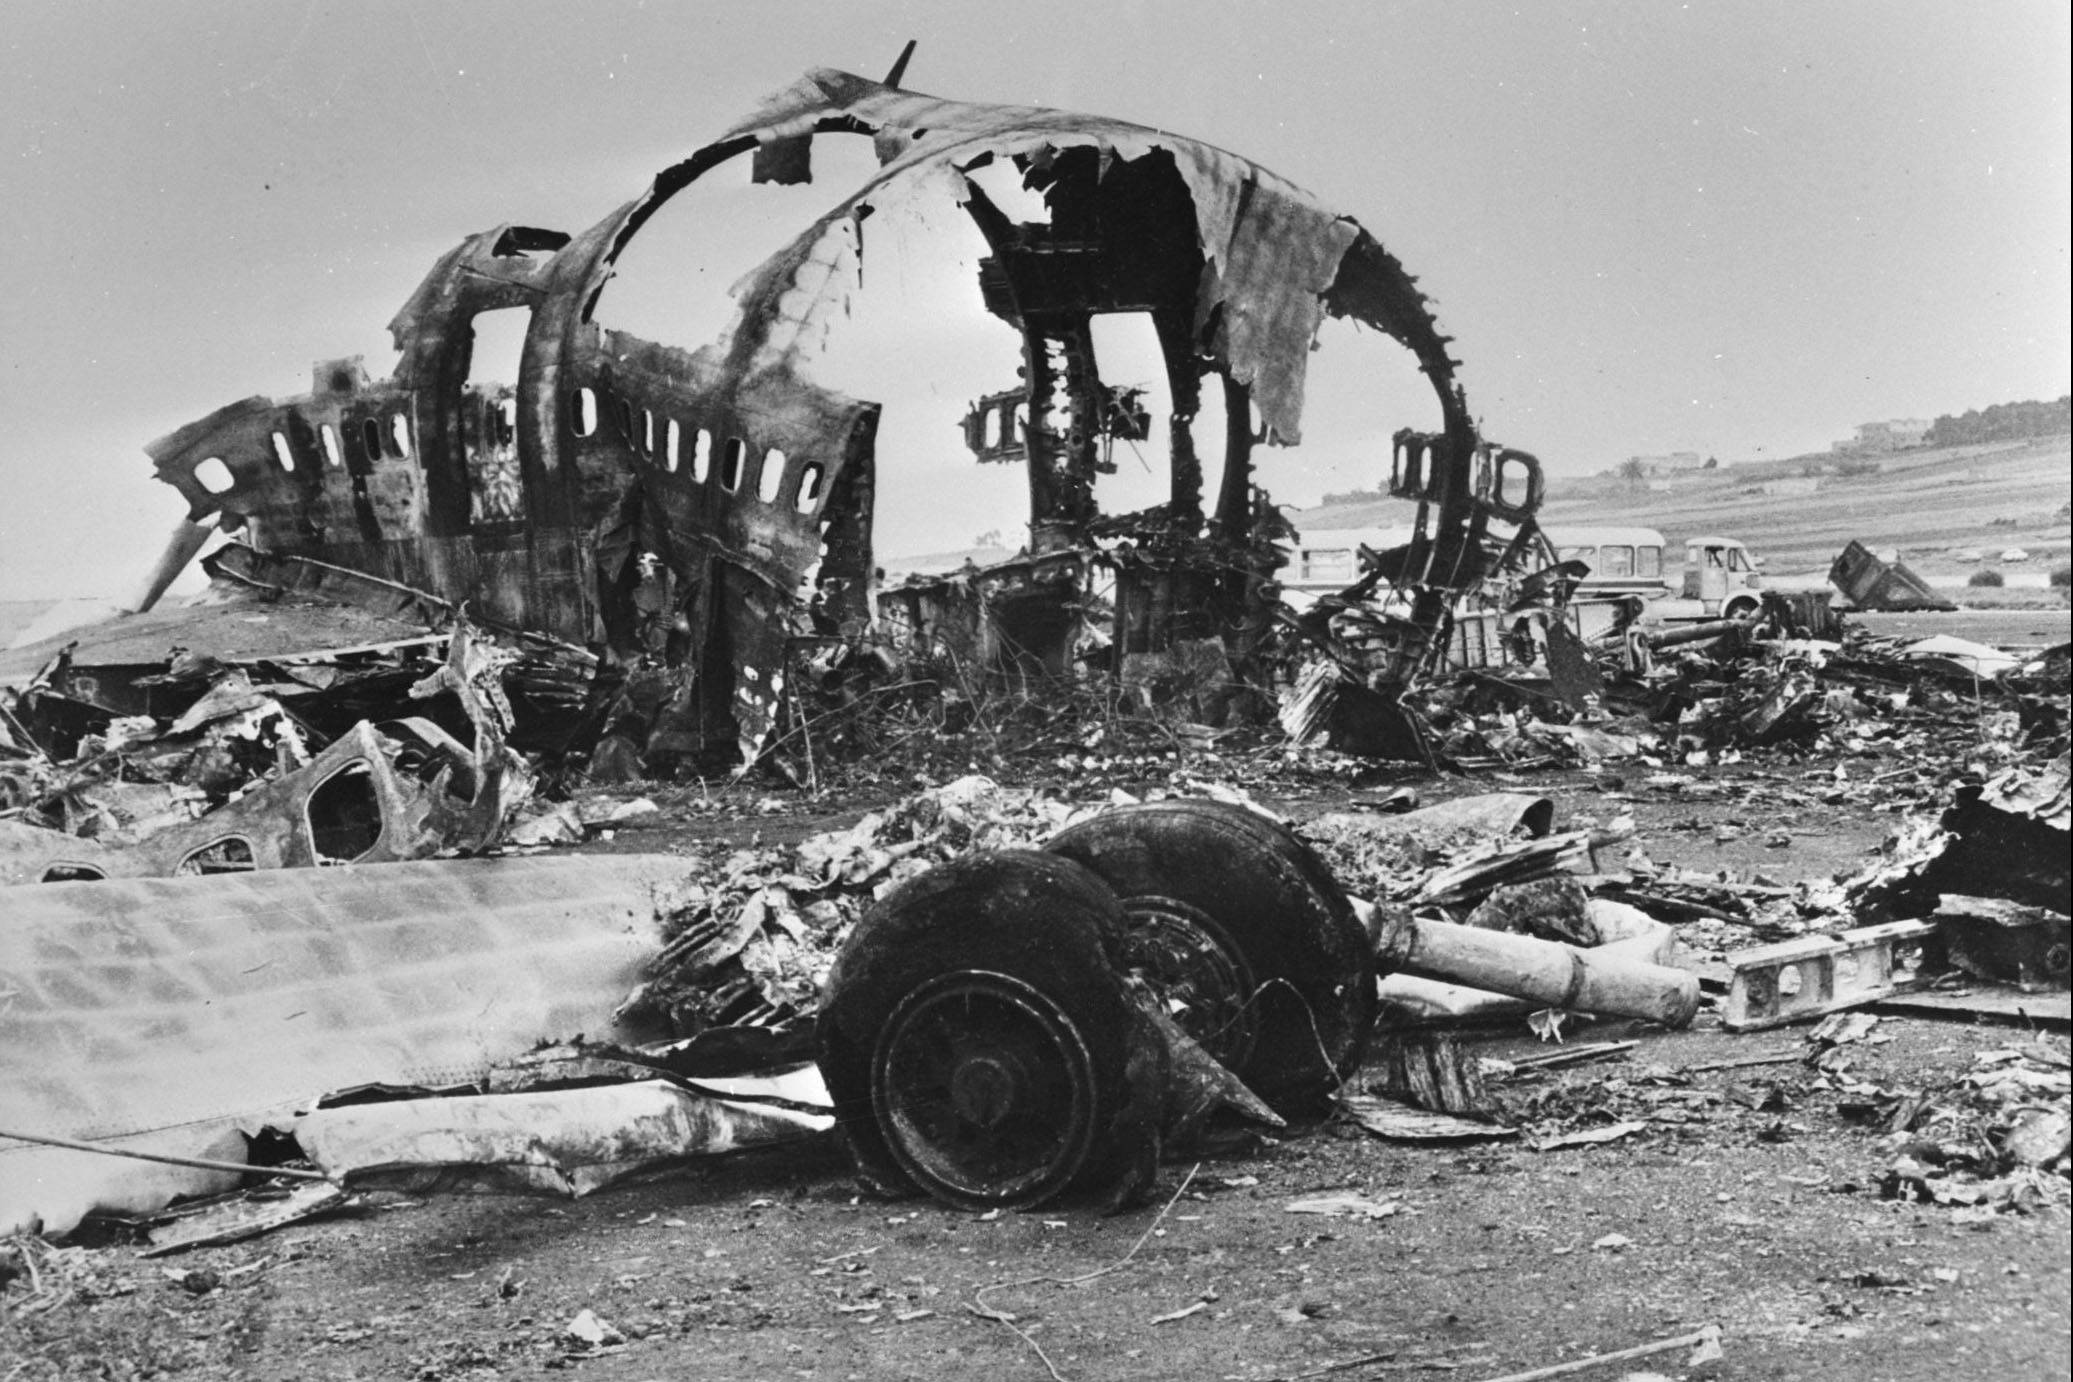 The Tenerife Airport Disaster